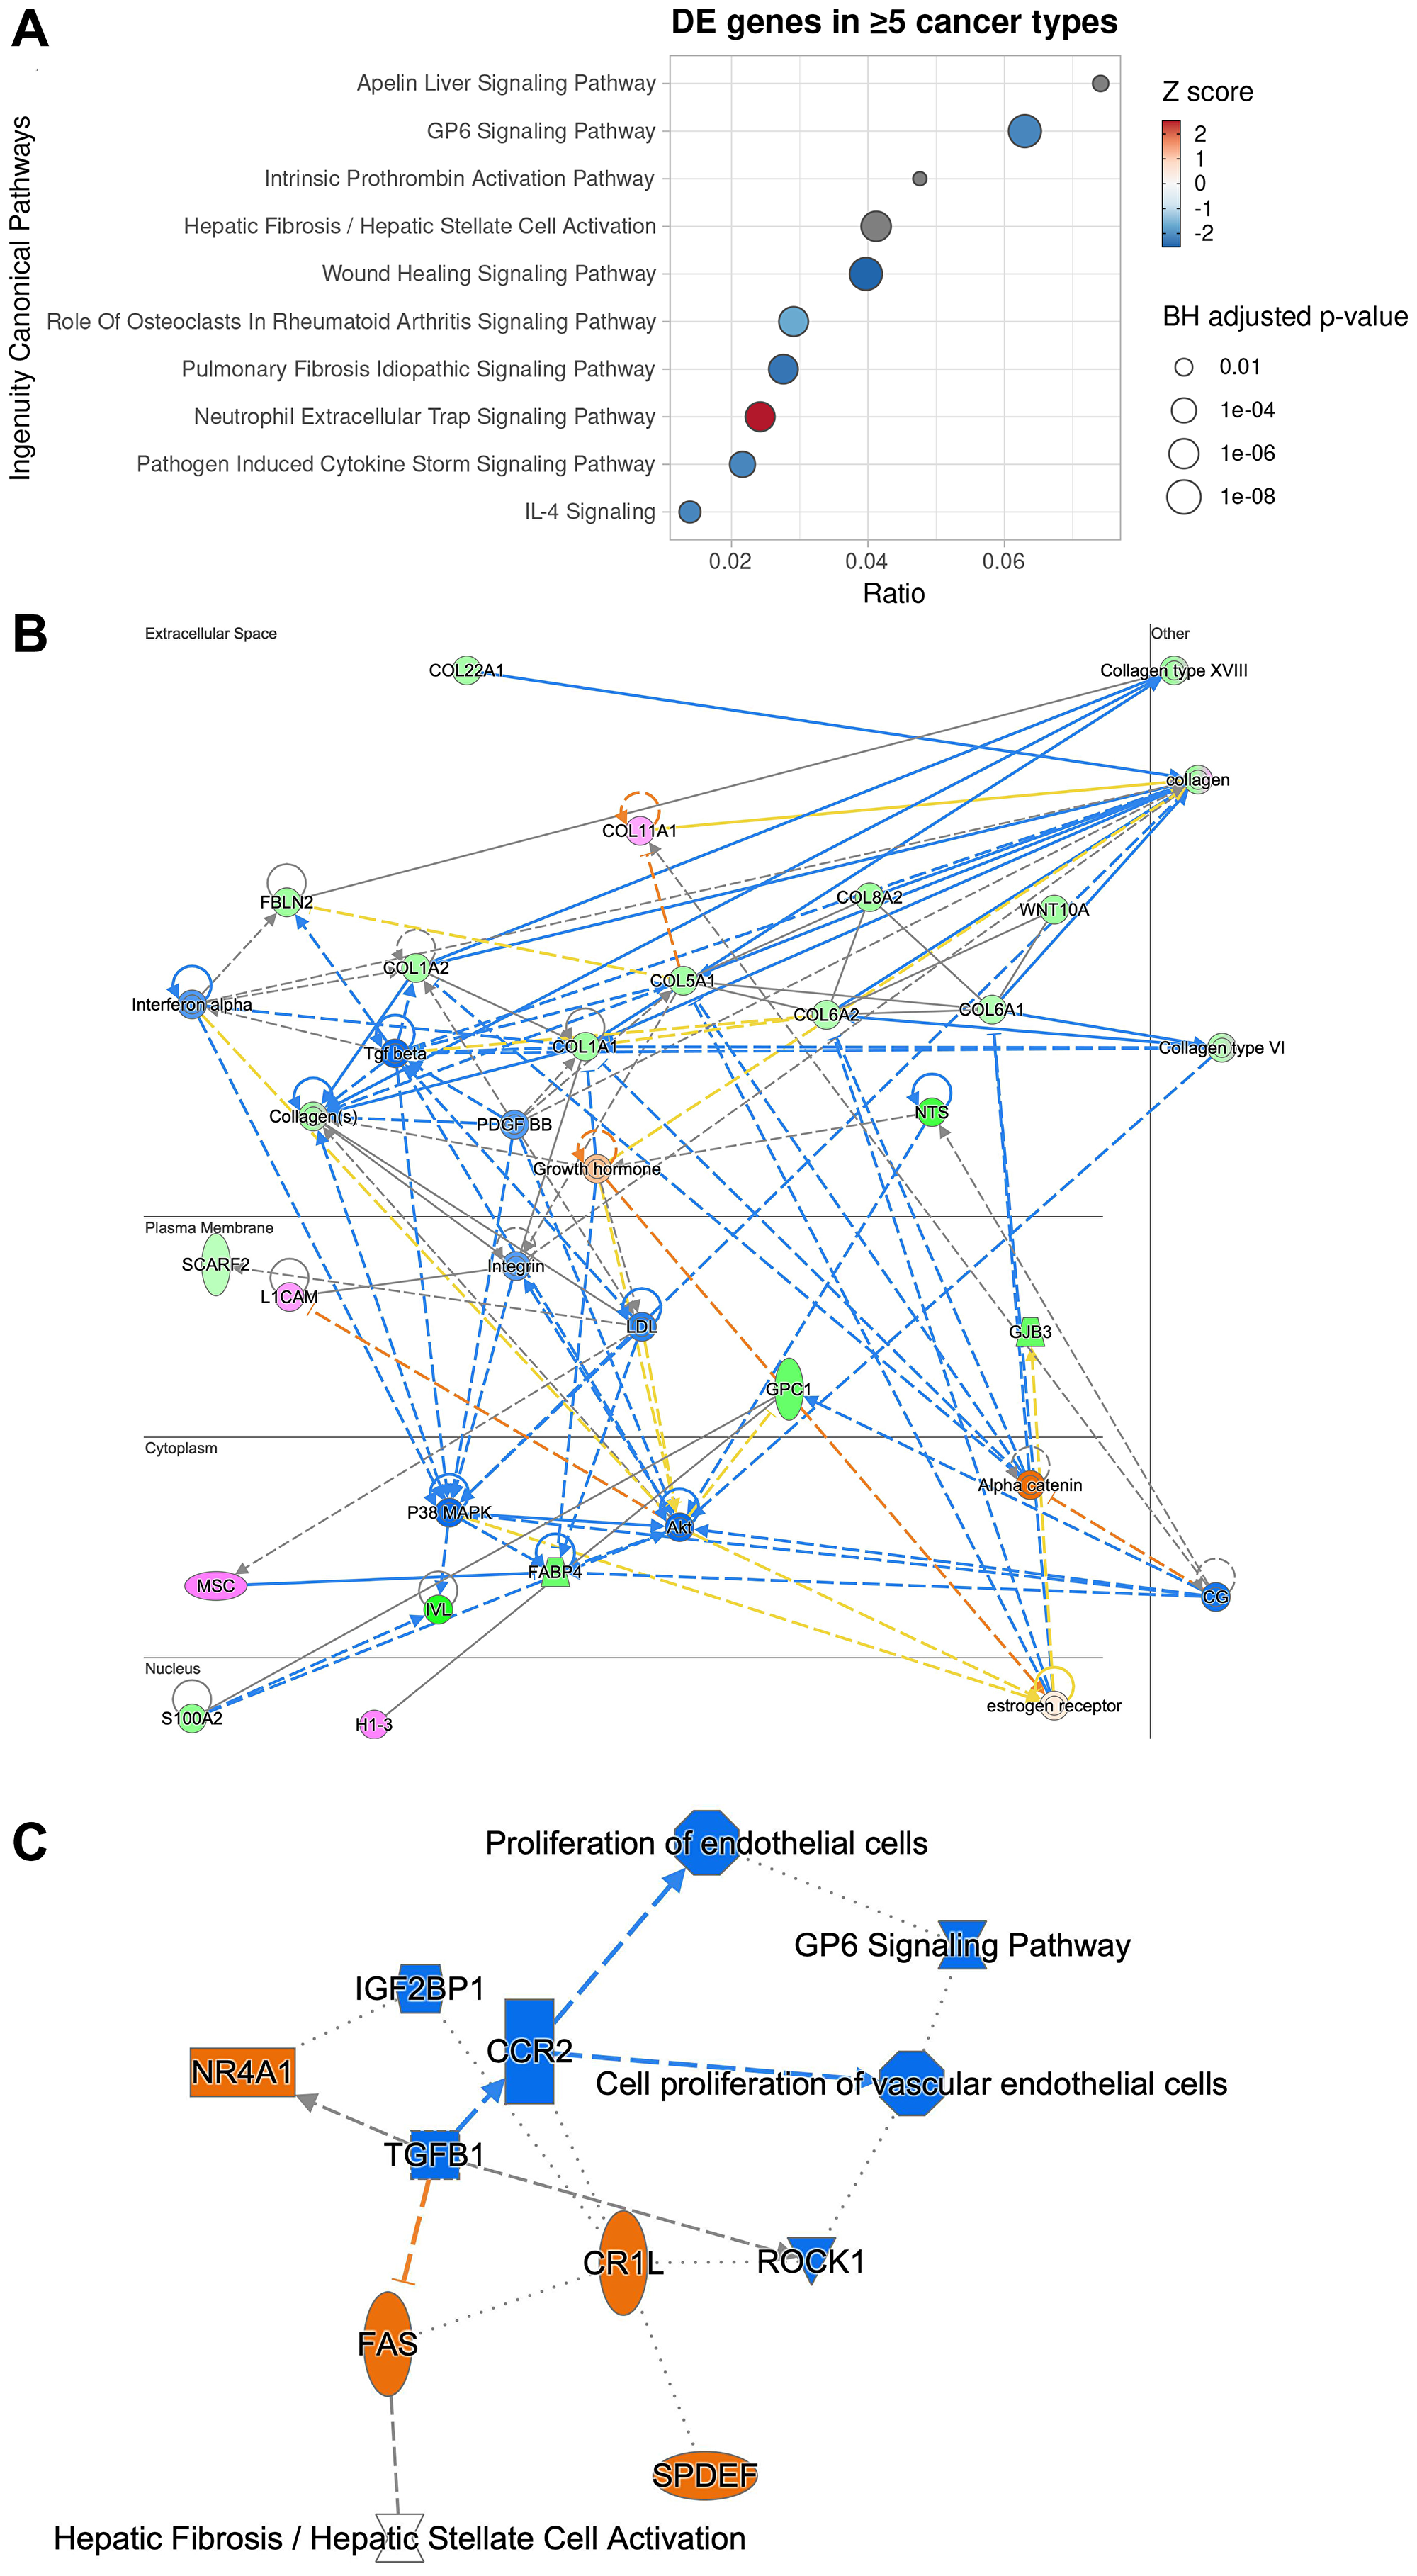 Ingenuity pathway analysis of 66 genes differentially expressed in at least 5 cancer types between GPC1-high and GPC1-low cancer patients reveals potential mechanism through which GPC1 modulates cell proliferation.